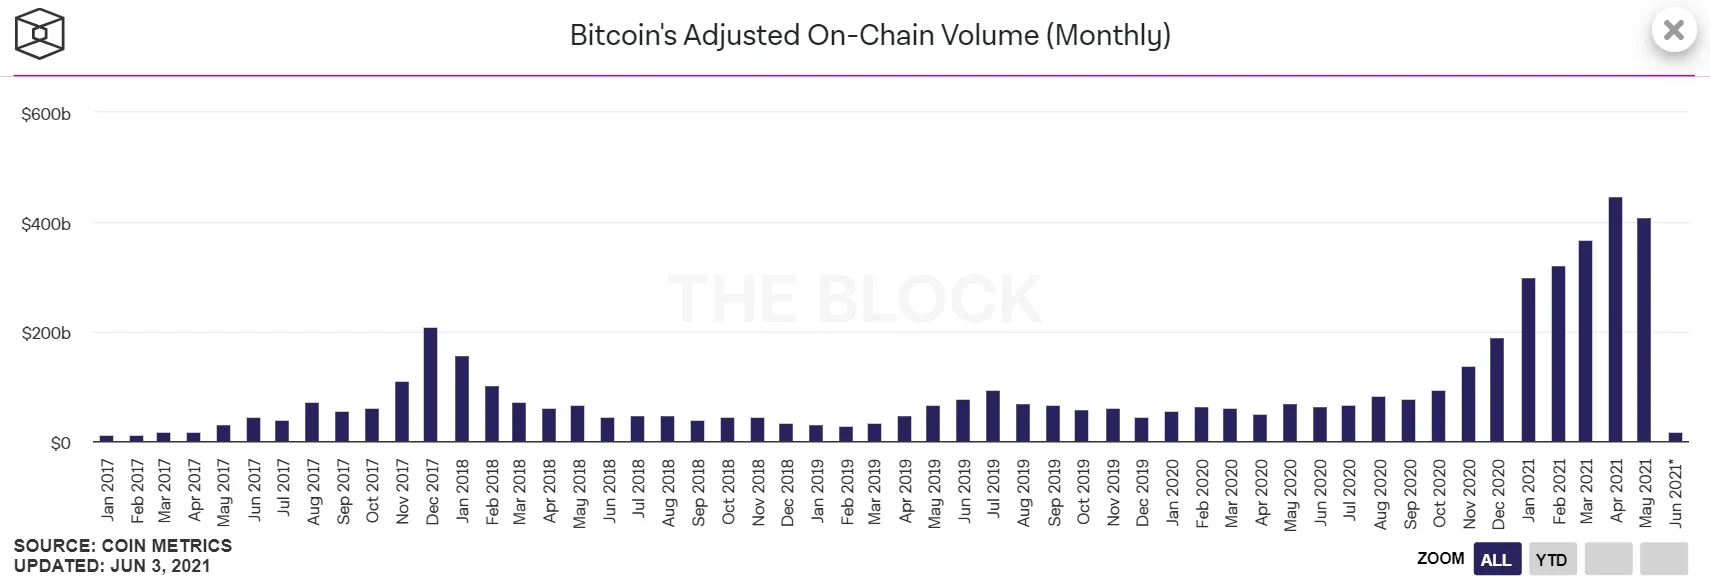 Bitcoin's Adjusted On-Chain Volume (Monthly)